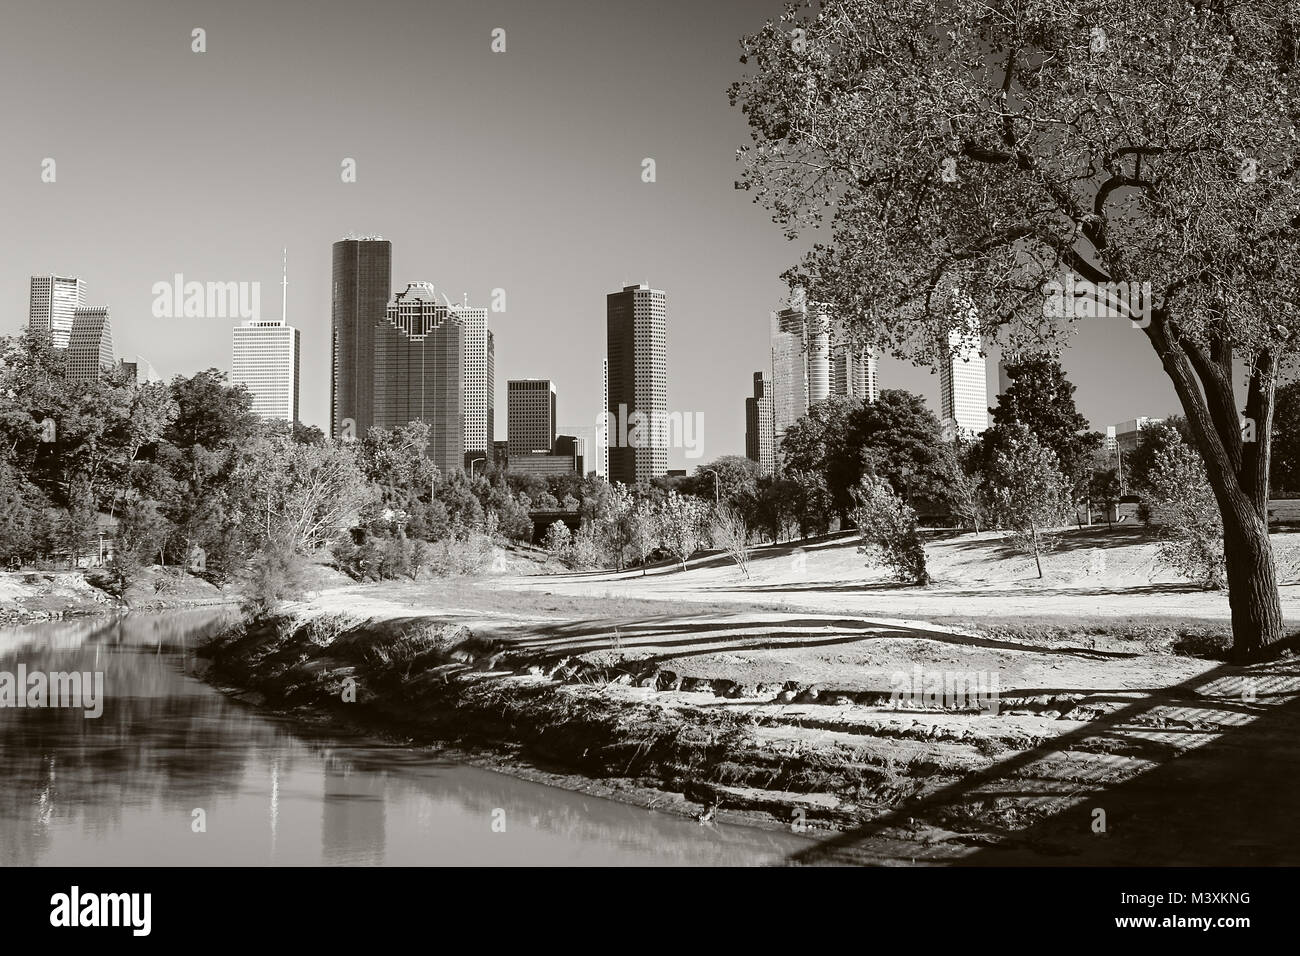 Downtown Houston Skyline in black and white Stock Photo